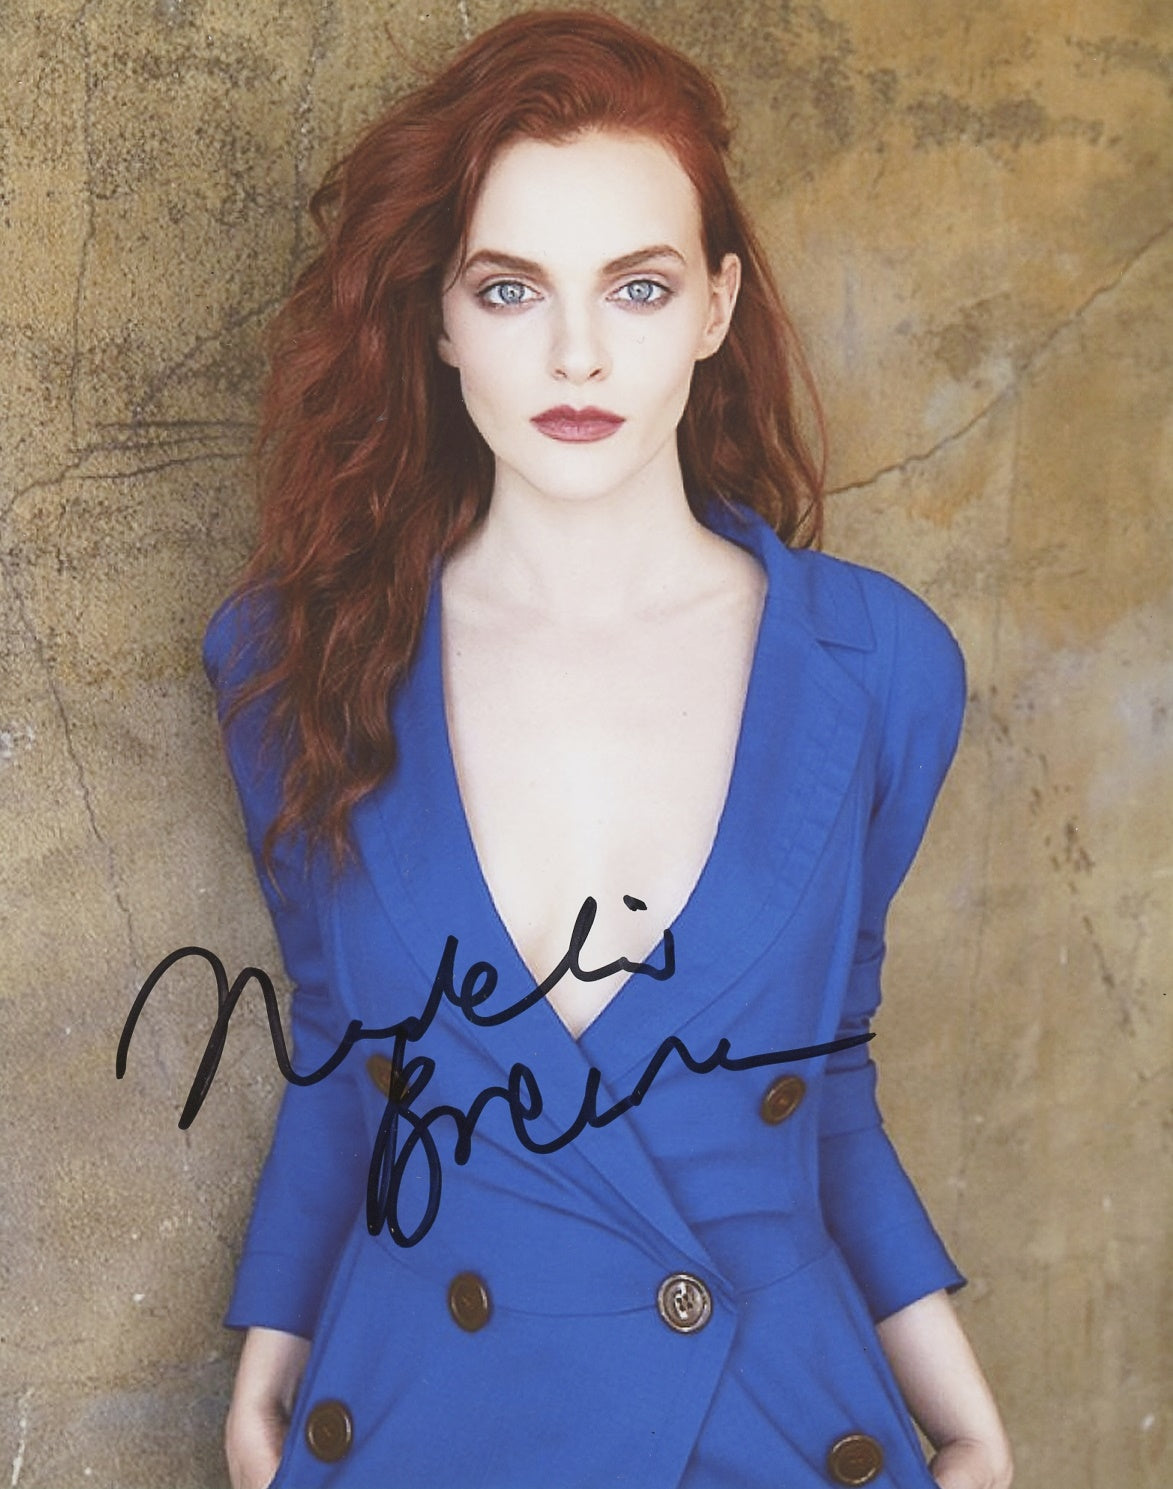 Madeline Brewer Signed 8x10 Photo - Video Proof